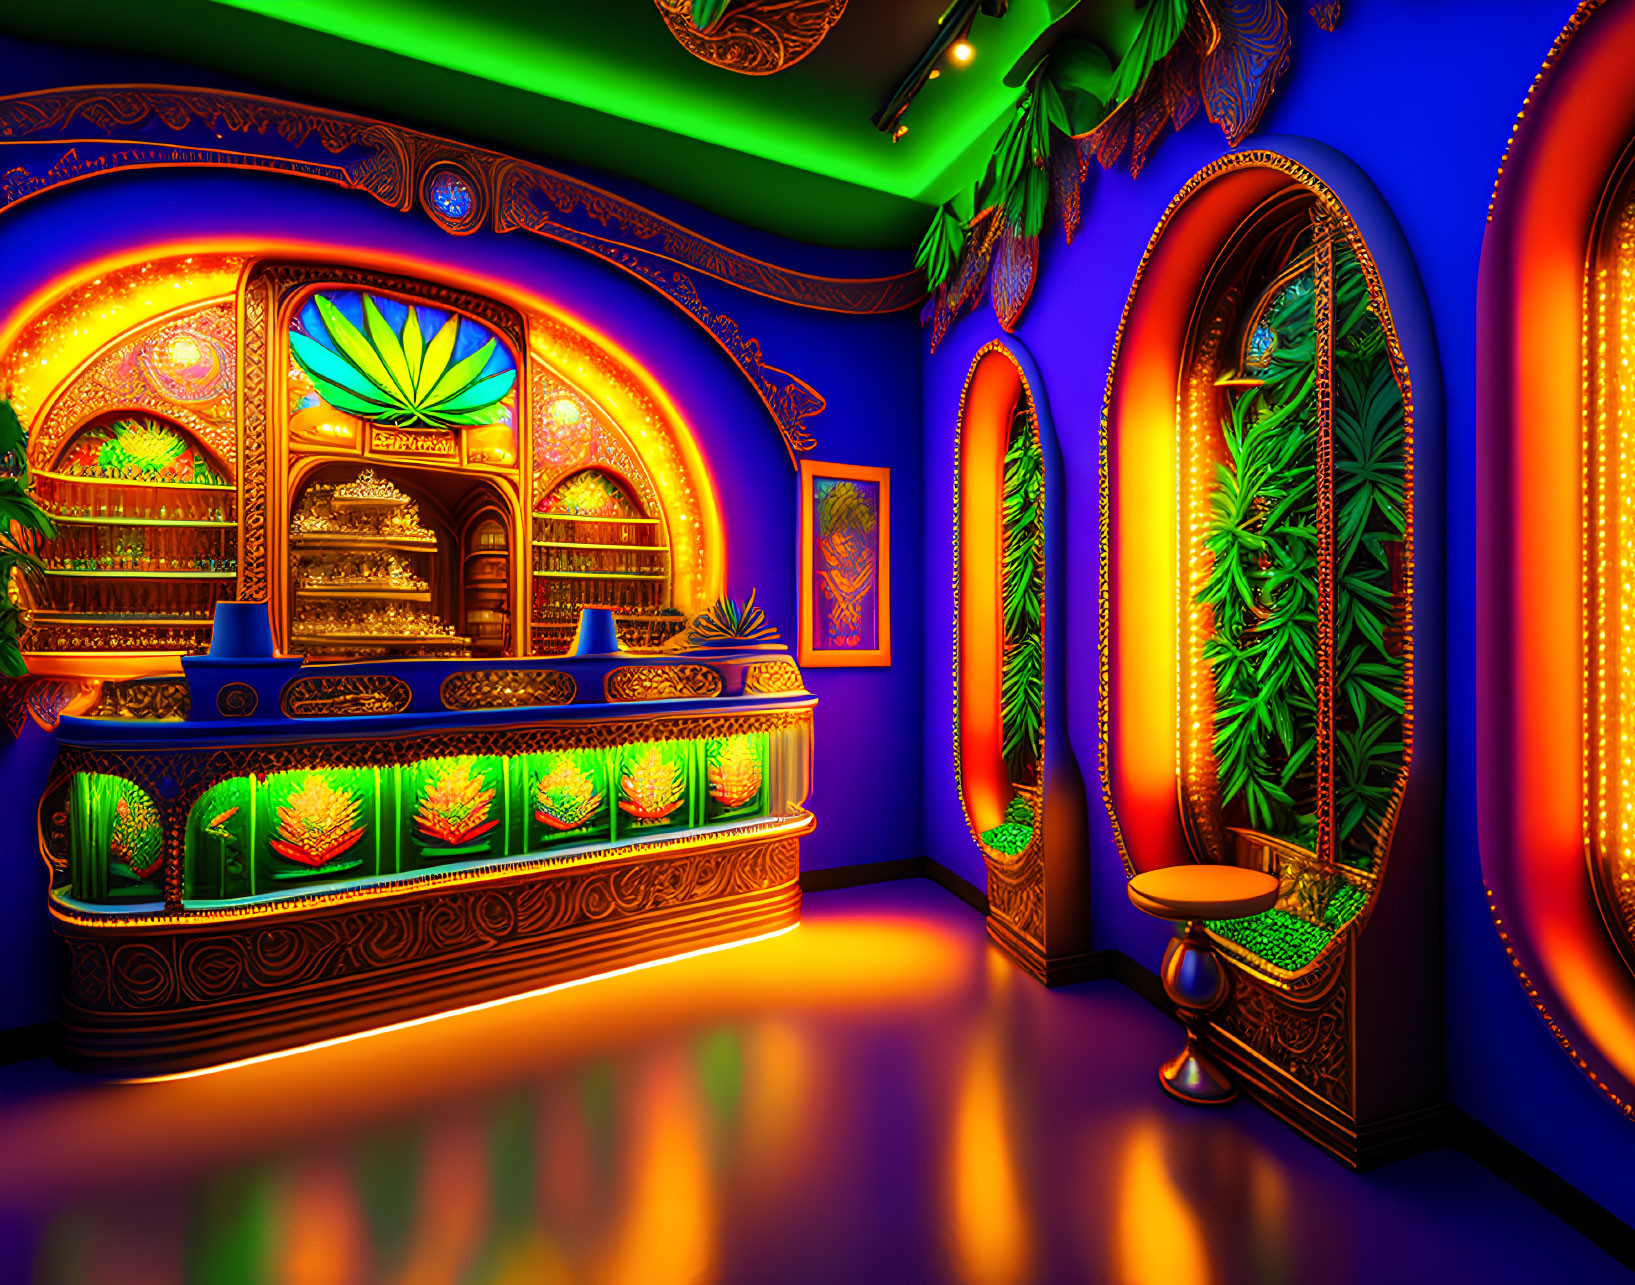 Ornate interior with illuminated archways and colorful lighting